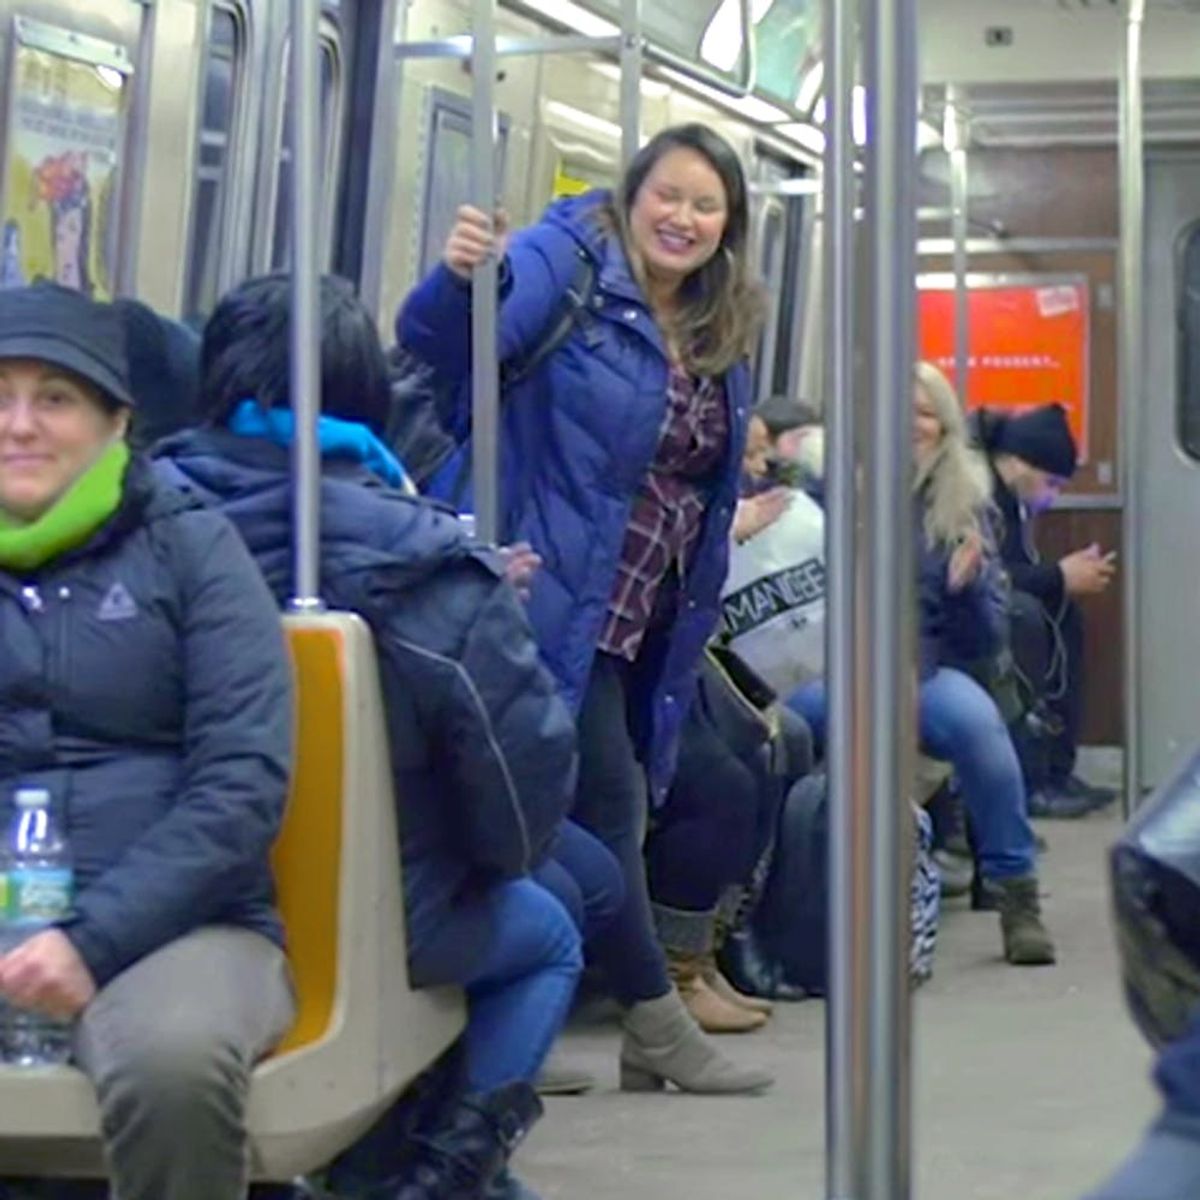 Forget Online Dating — This Woman Panhandled on the Subway to Find Her Dream Man